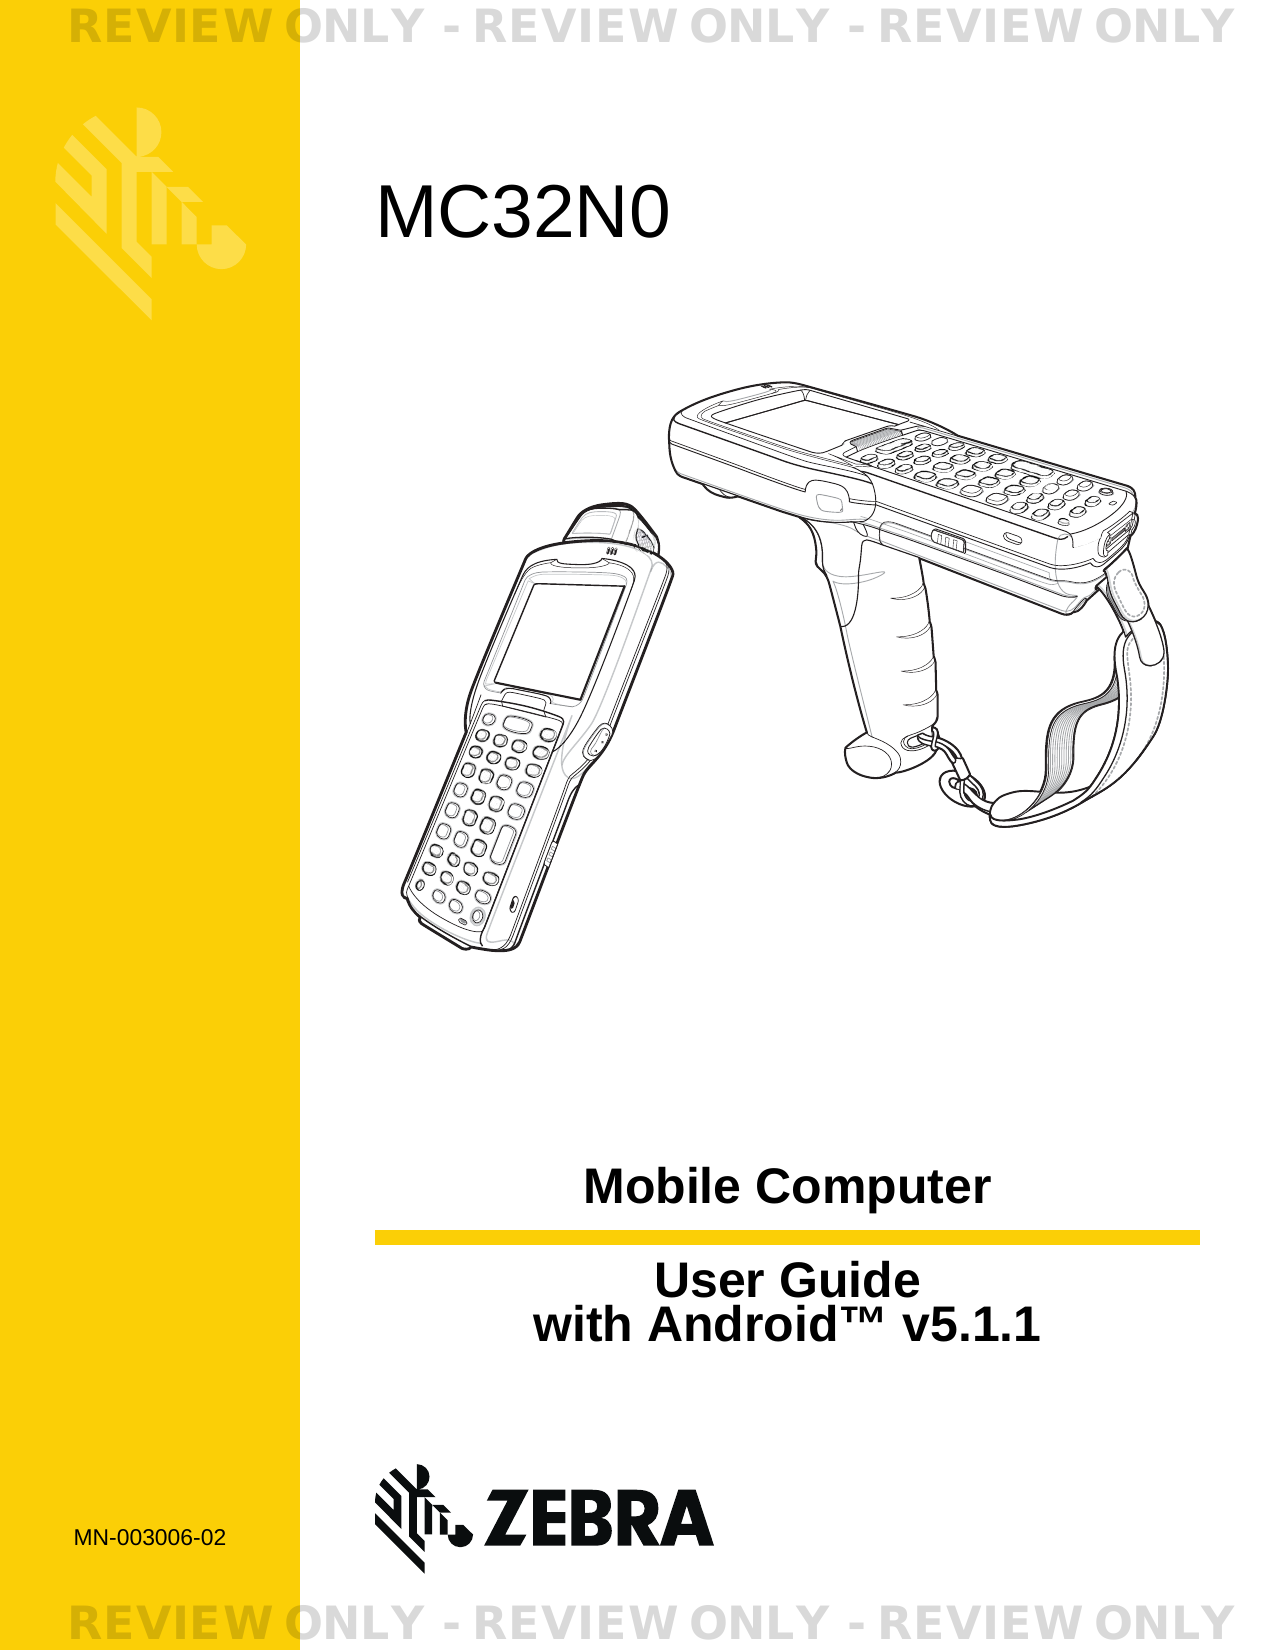 Mobile ComputerUser Guidewith Android™ v5.1.1MC32N0MN-003006-02REVIEW ONLY - REVIEW ONLY - REVIEW ONLY                             REVIEW ONLY - REVIEW ONLY - REVIEW ONLY